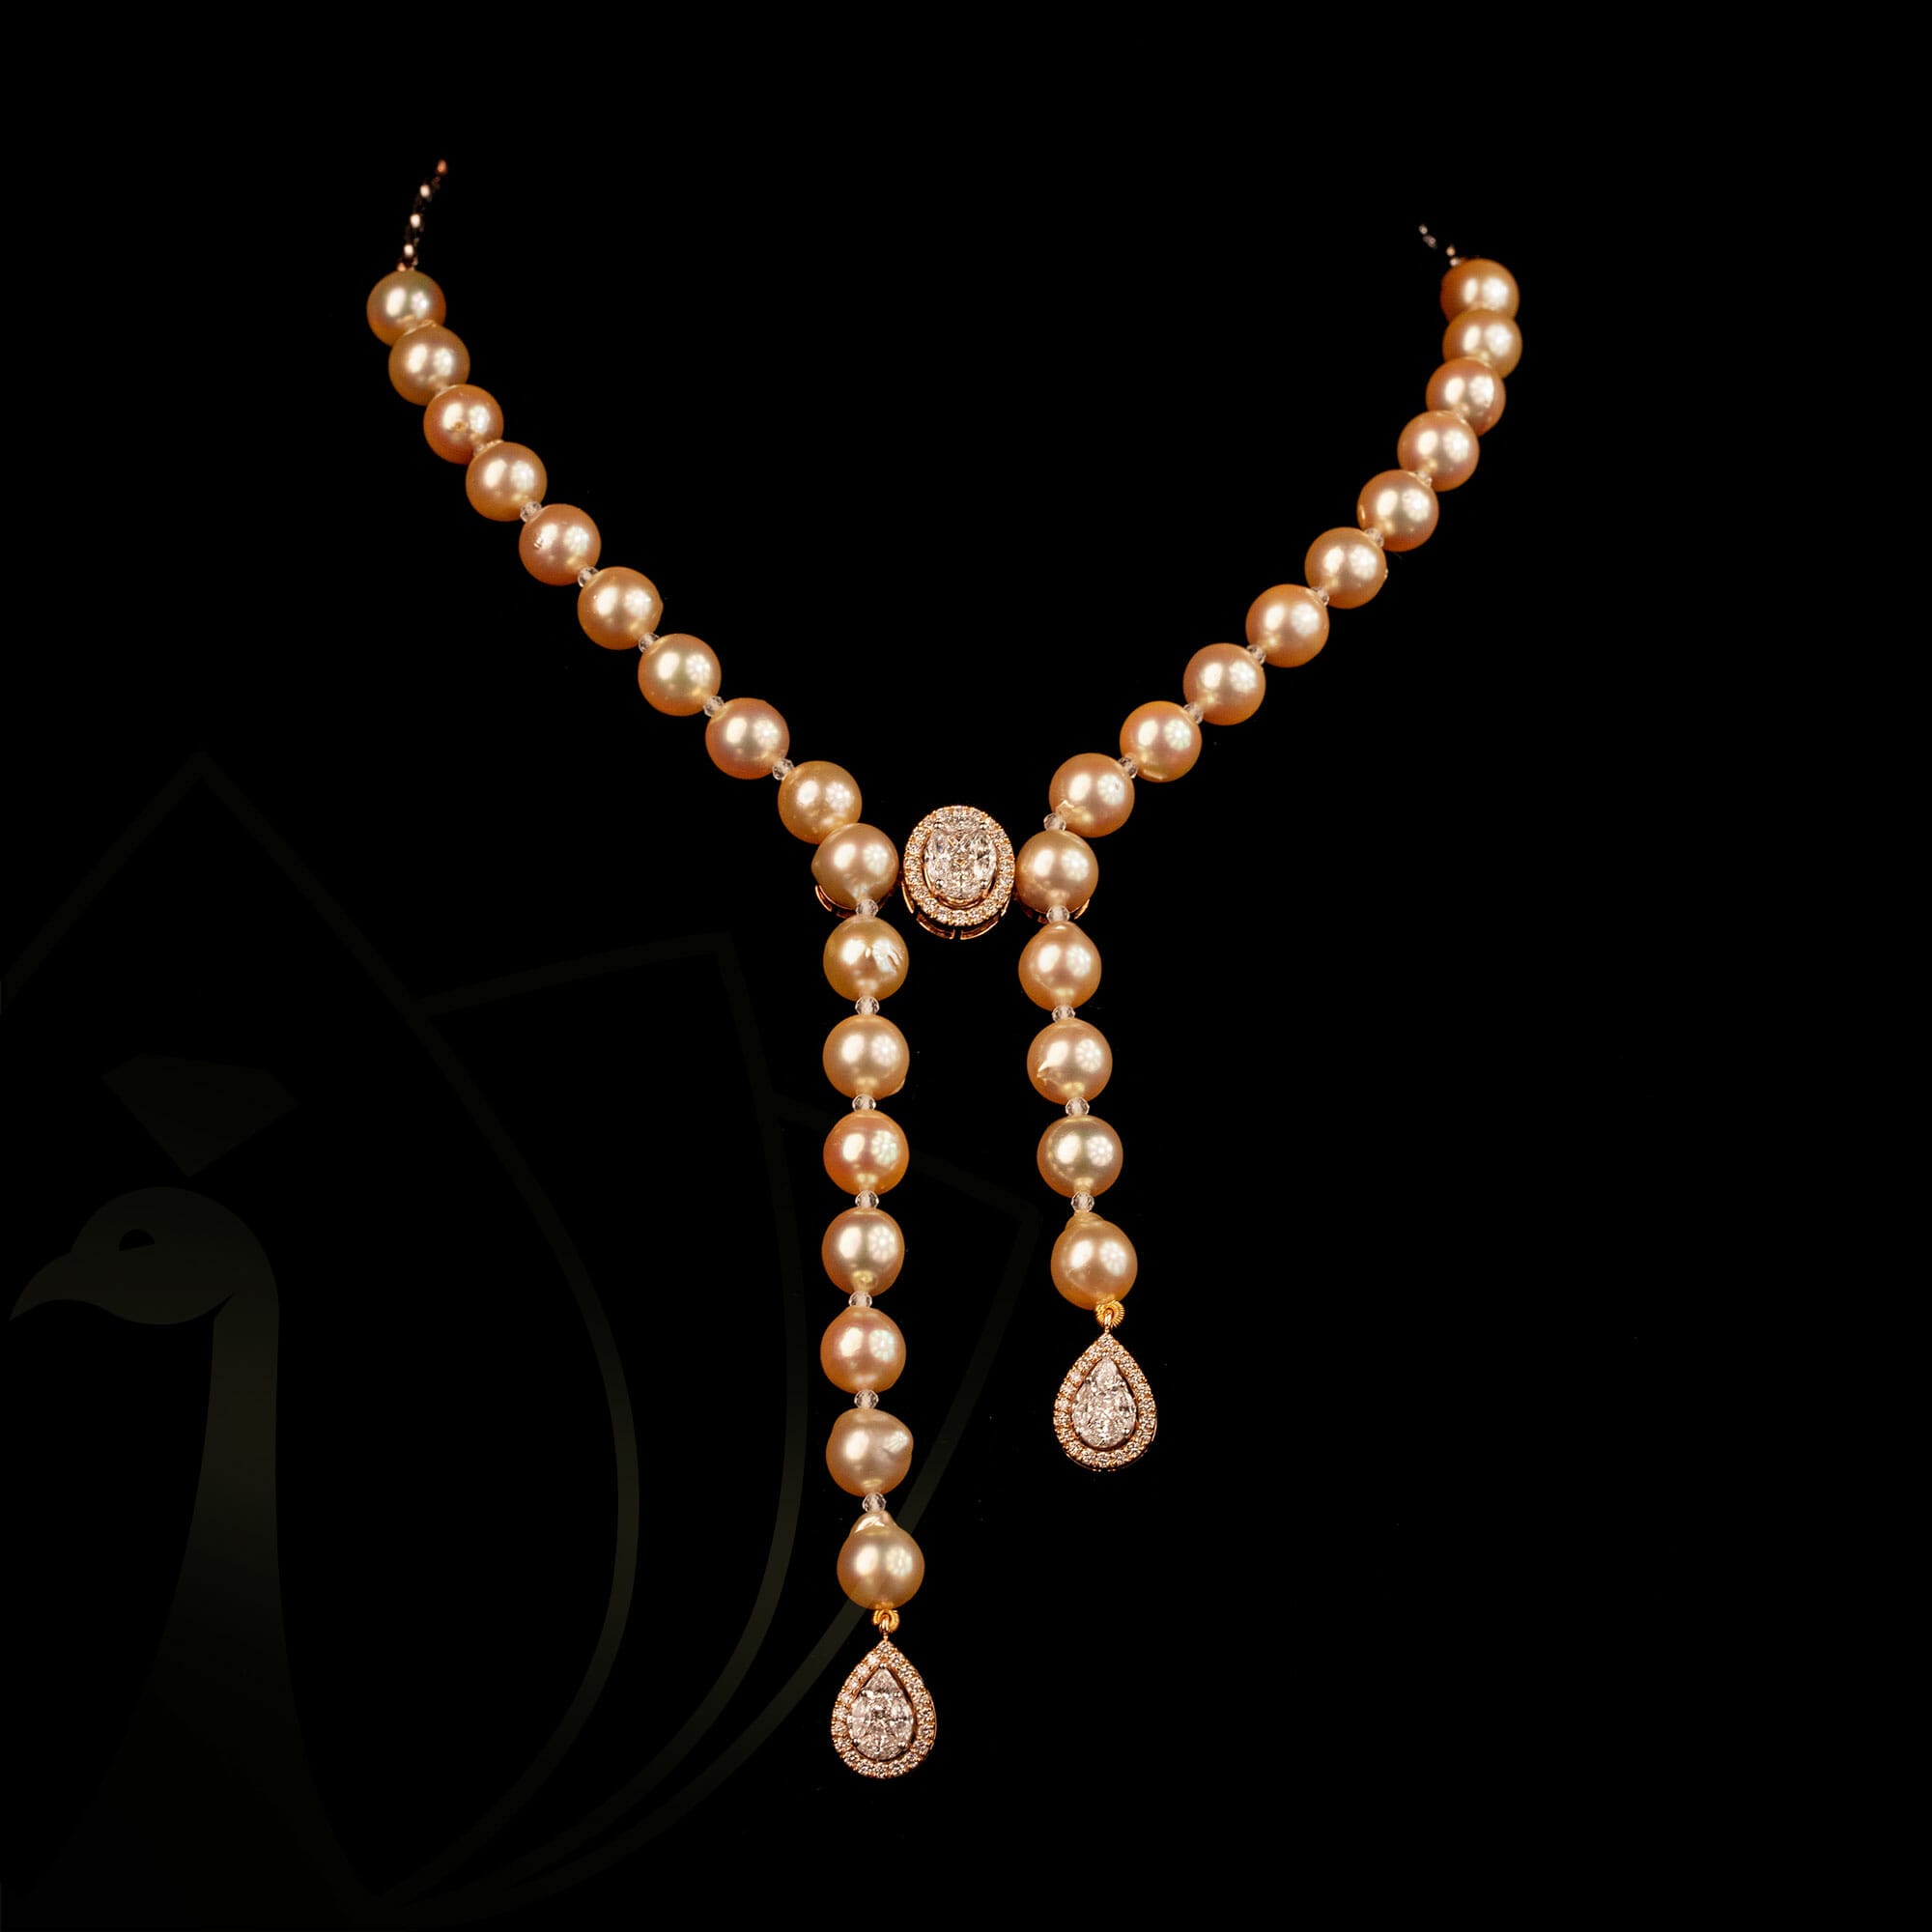 Pretty in Pearl Diamond Necklace from our exclusive Gulz Collection